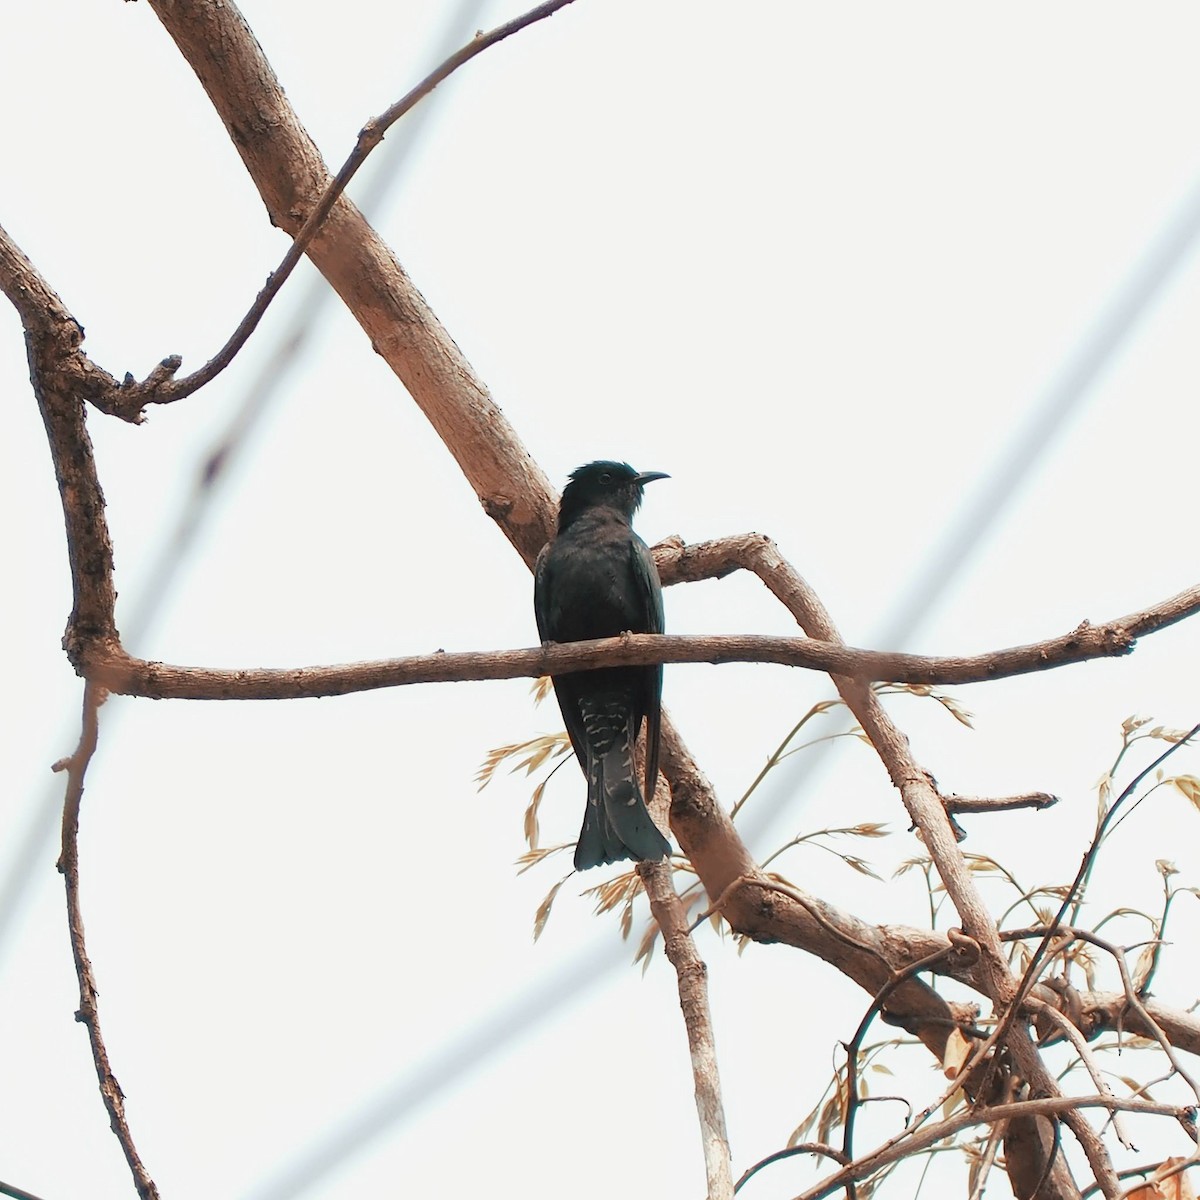 Square-tailed Drongo-Cuckoo - Nuttapong Jomjan